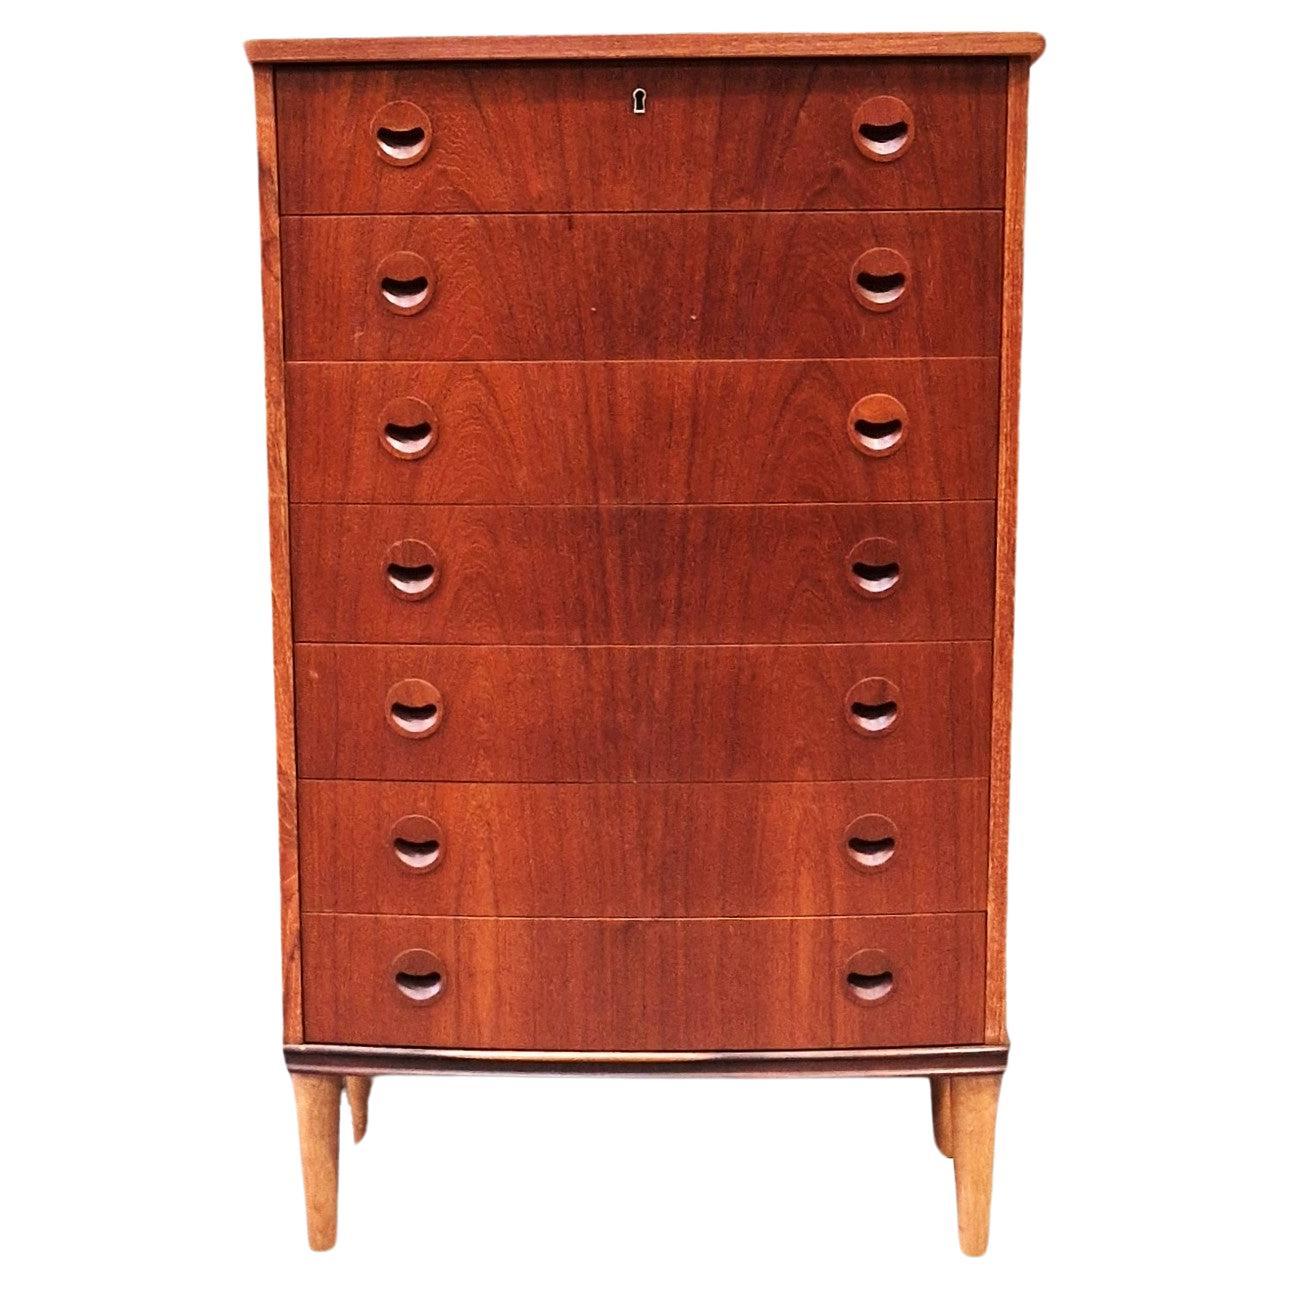 "Tall boy" chest of drawers by Kai Kristiansen, Denmark, 1960's For Sale